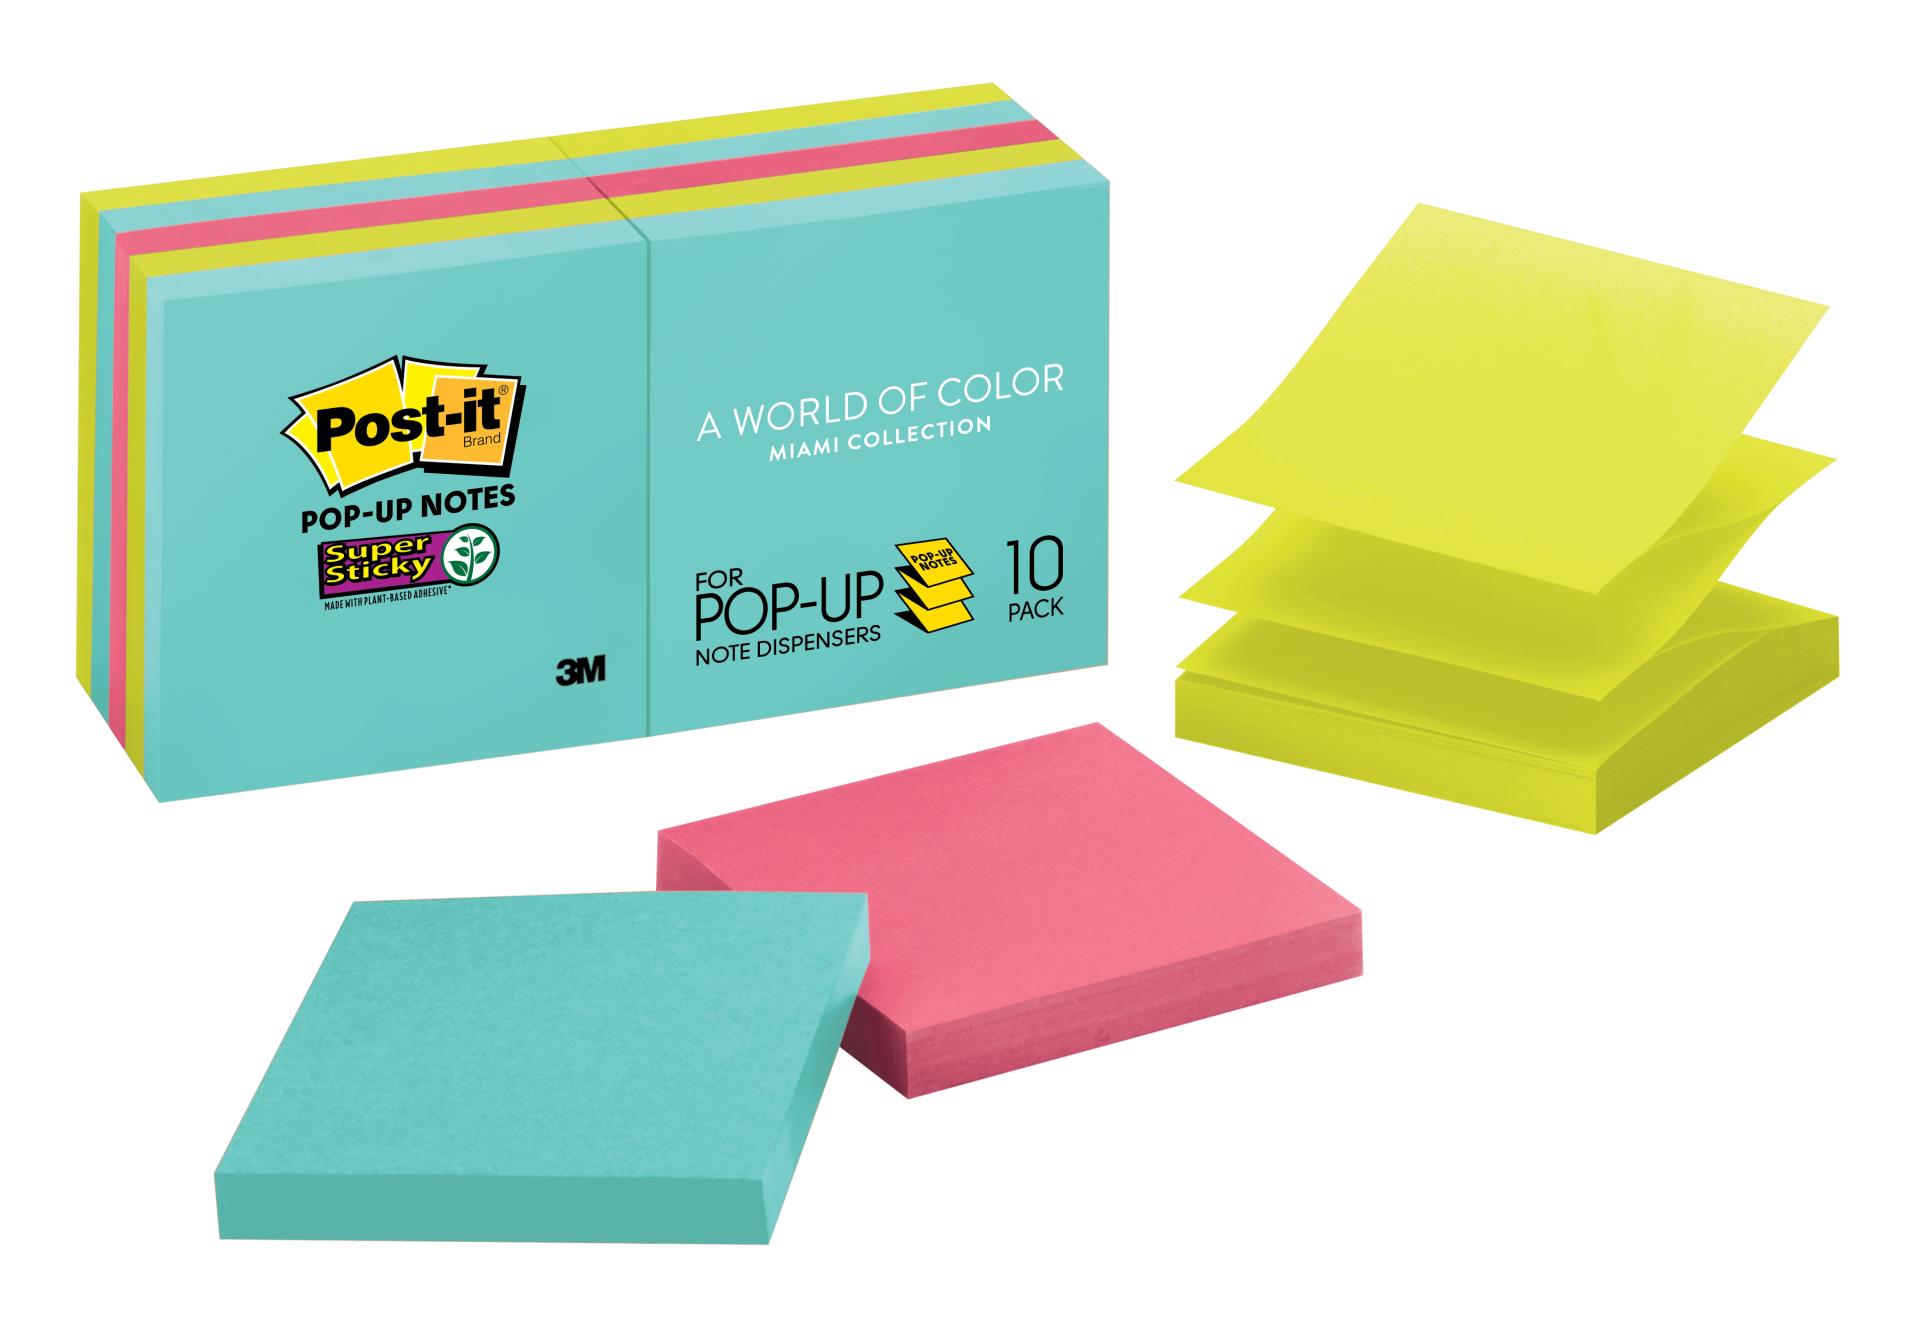 7100089132 - Post-it® Super Sticky Pop-up Notes R330-10SSMIA, 3 in x 3 in (76 mm x 76 mm), Miami collection, 10 Pads/Pack, 90 Sheets/Pad